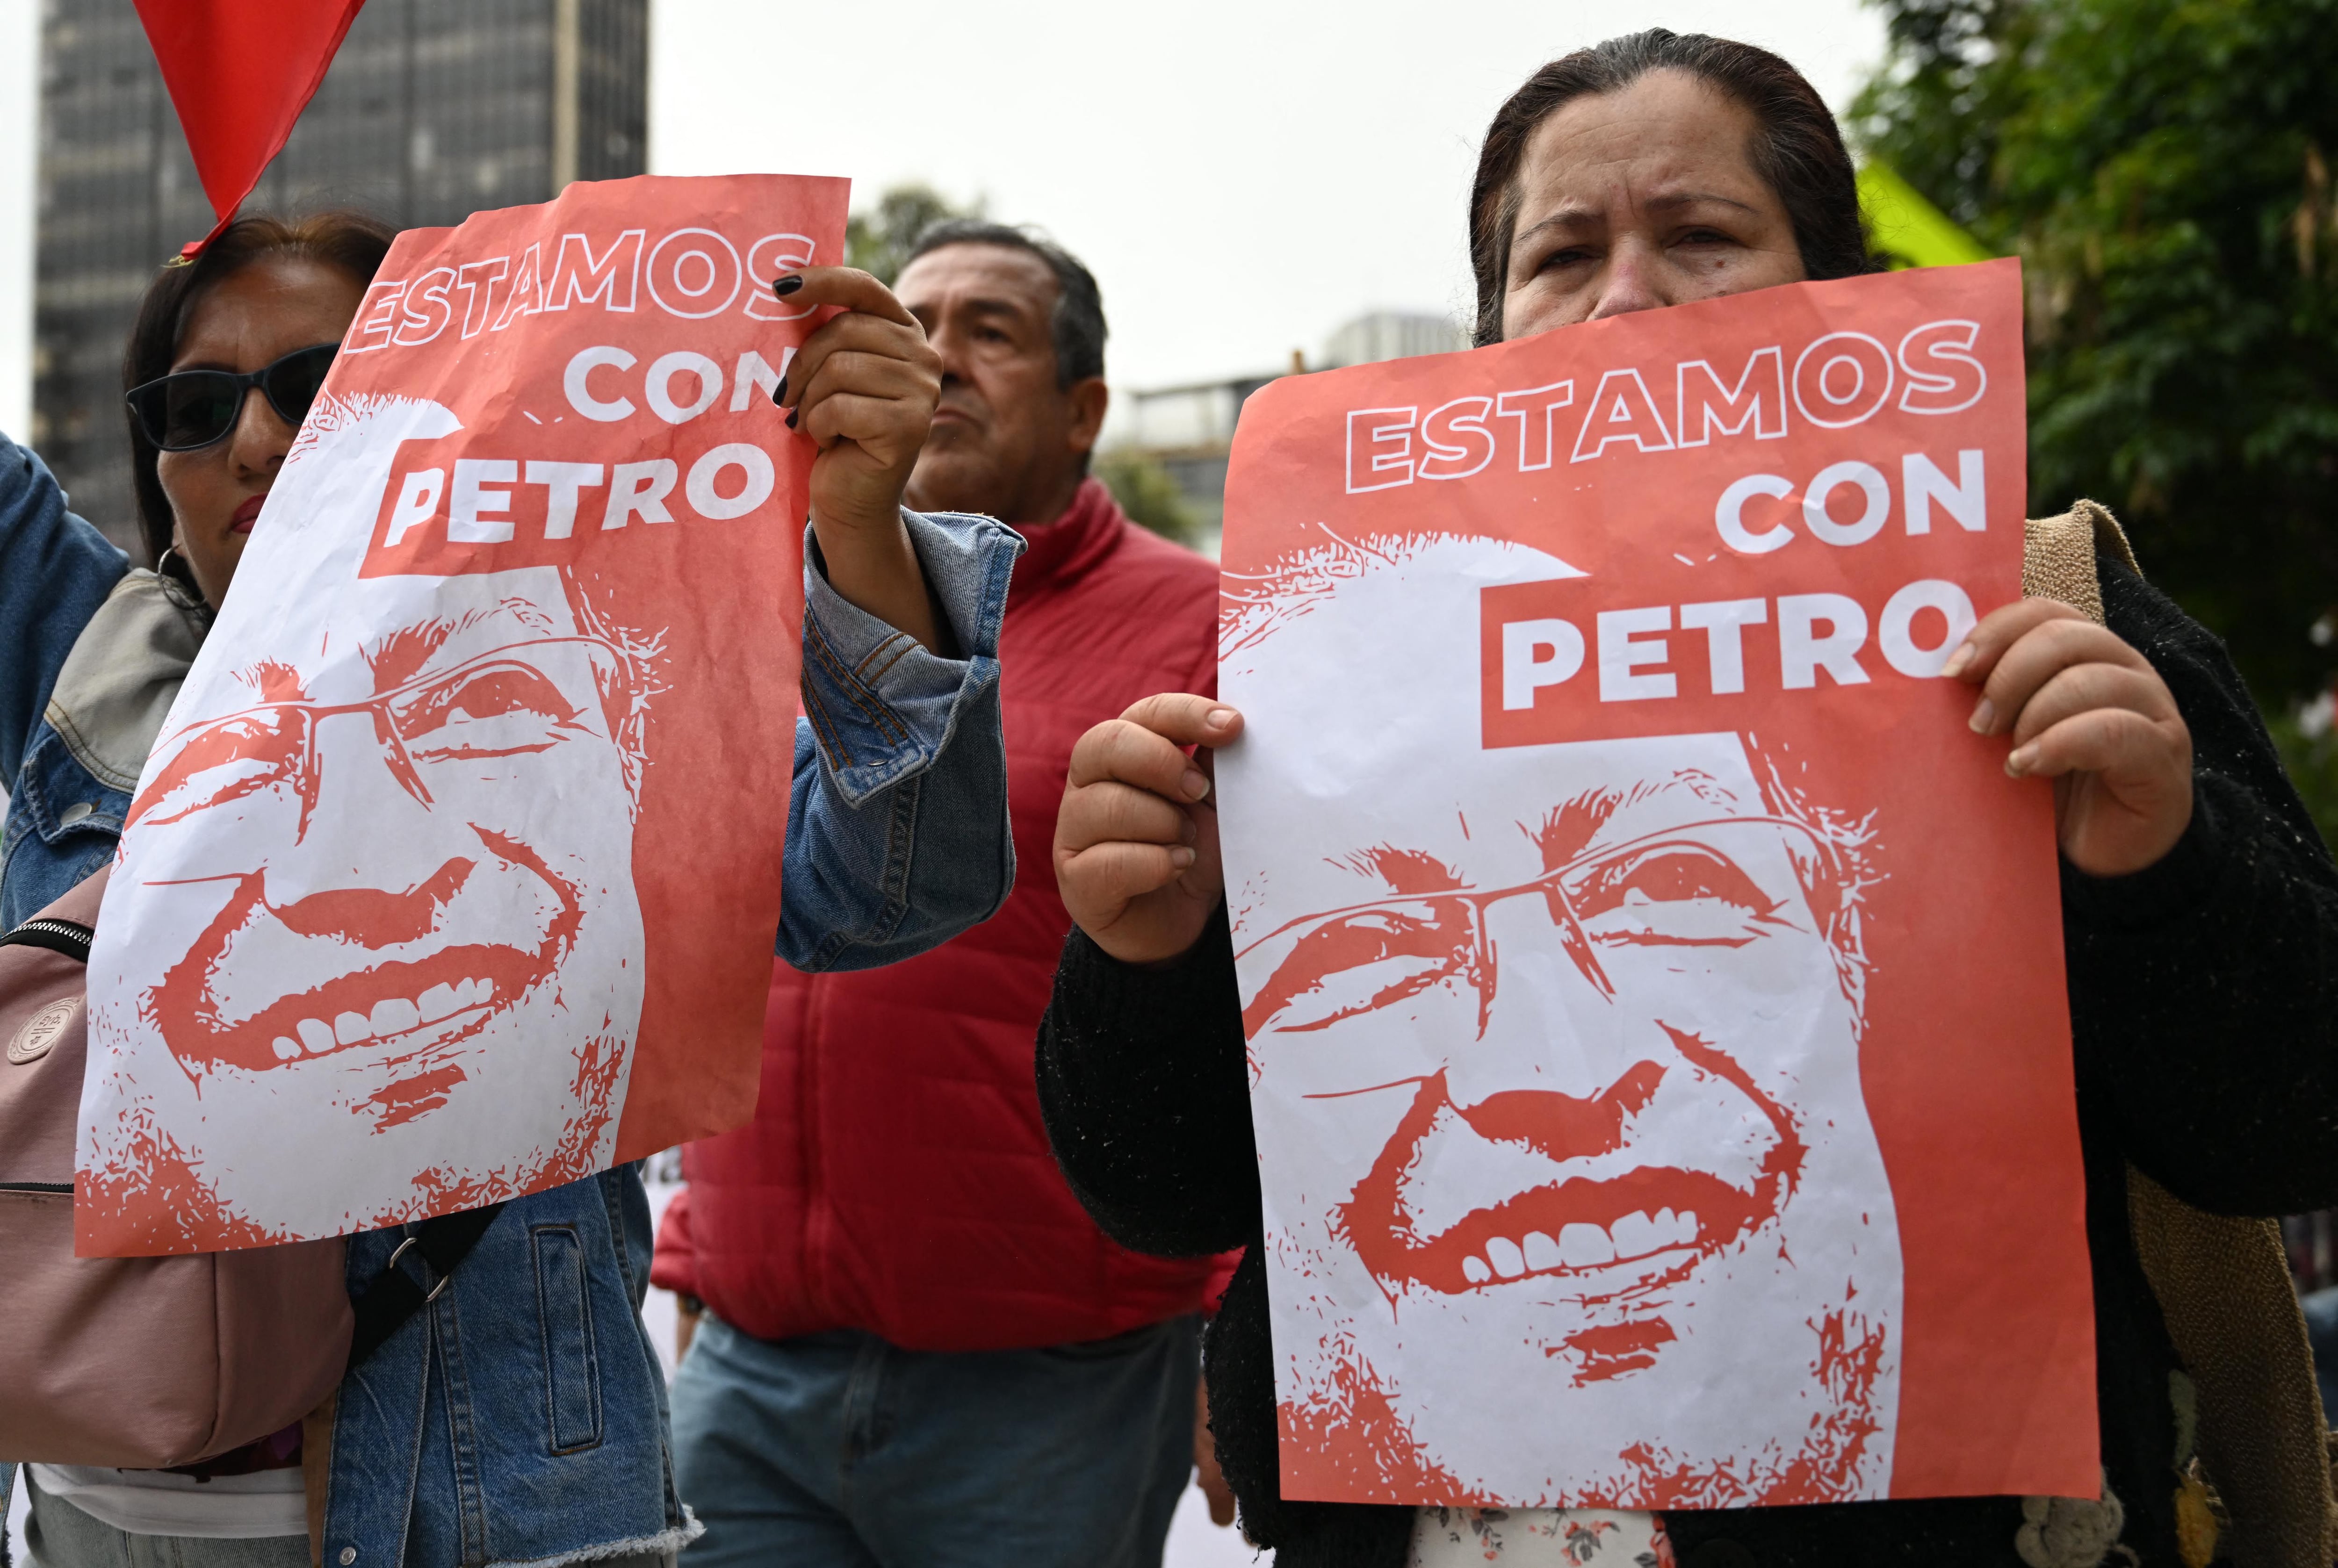 Supporters of Colombian President Gustavo Petro demonstrate in favor of his proposed social reforms in Bogotá on June 7, 2023. (Photo by Raul ARBOLEDA / AFP)